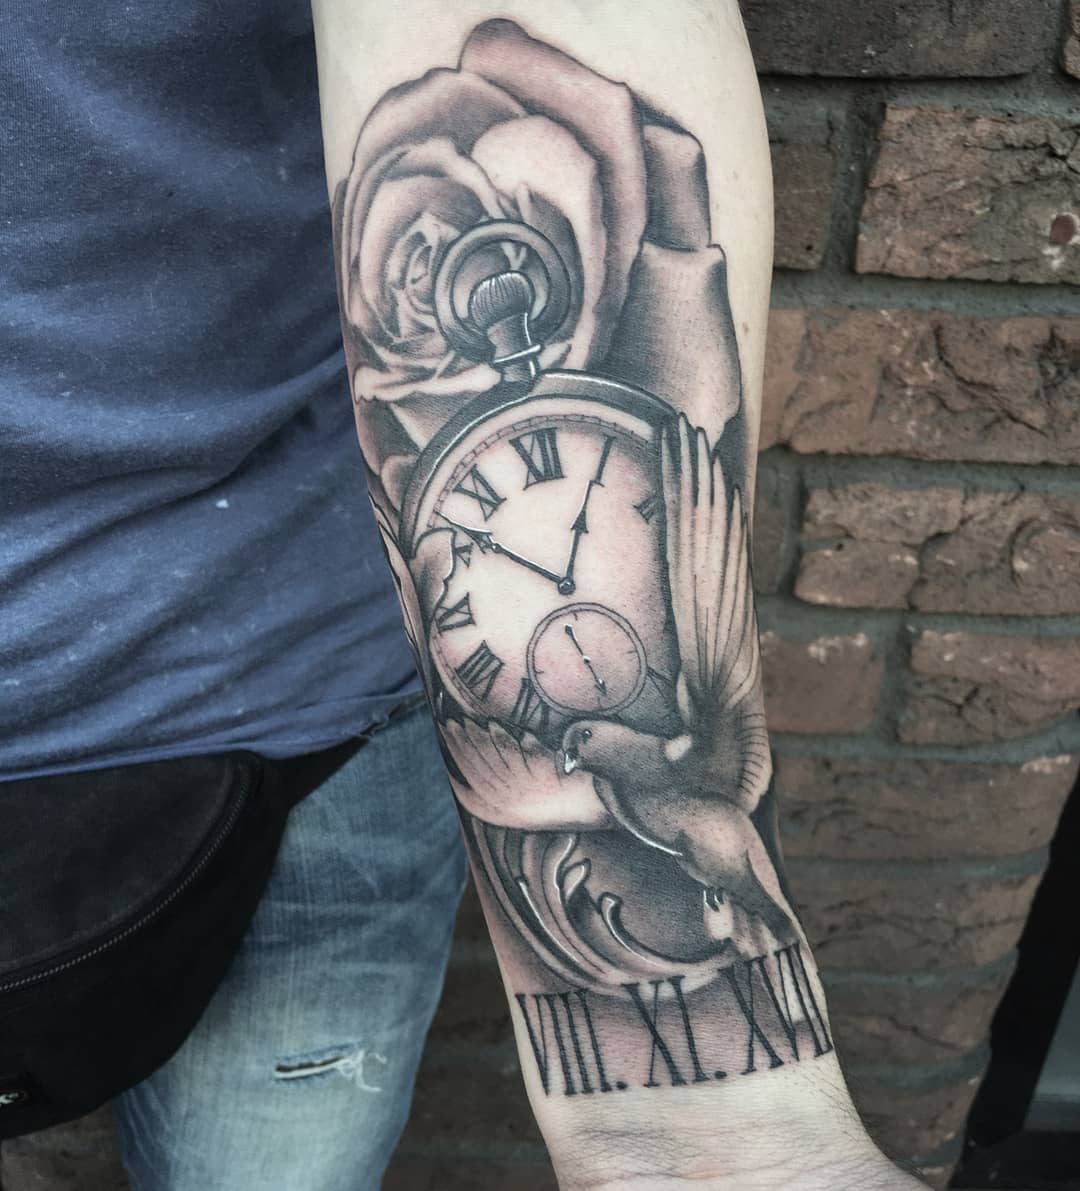 Thank you Marcel for your Trust
#germantattooers #tattooworkers #germanartist #t